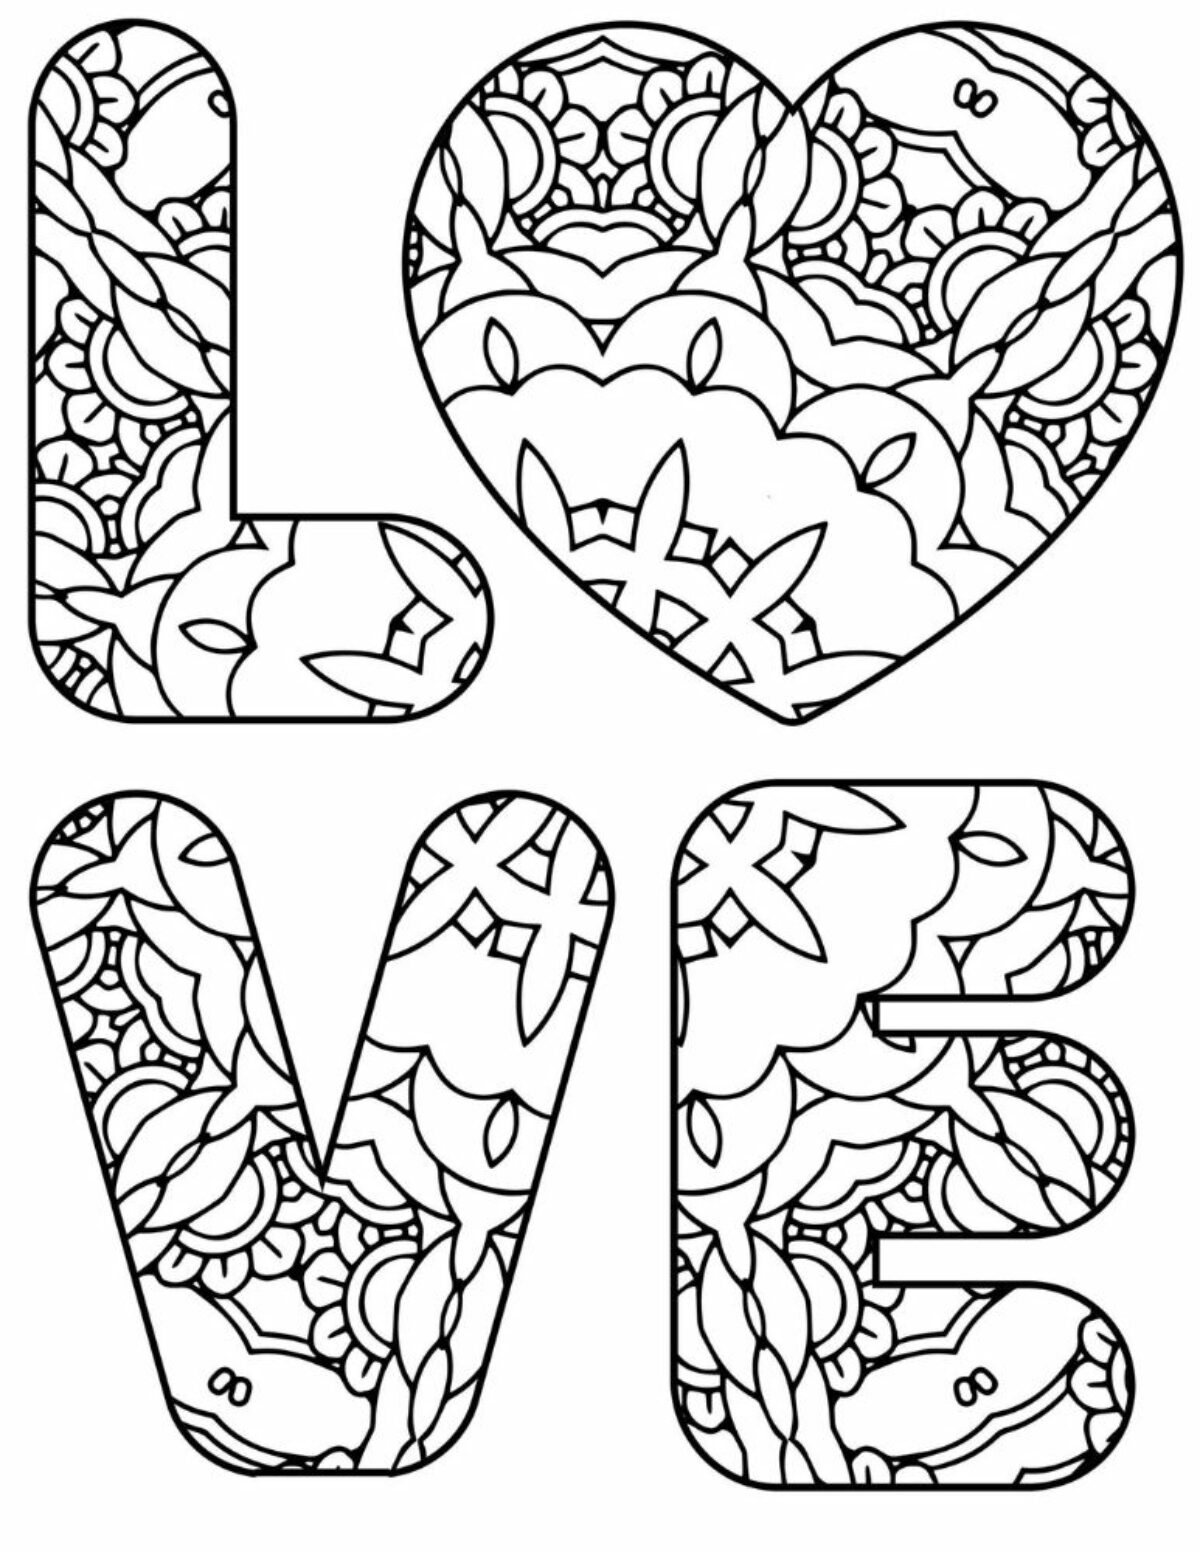 free coloring pages i love you